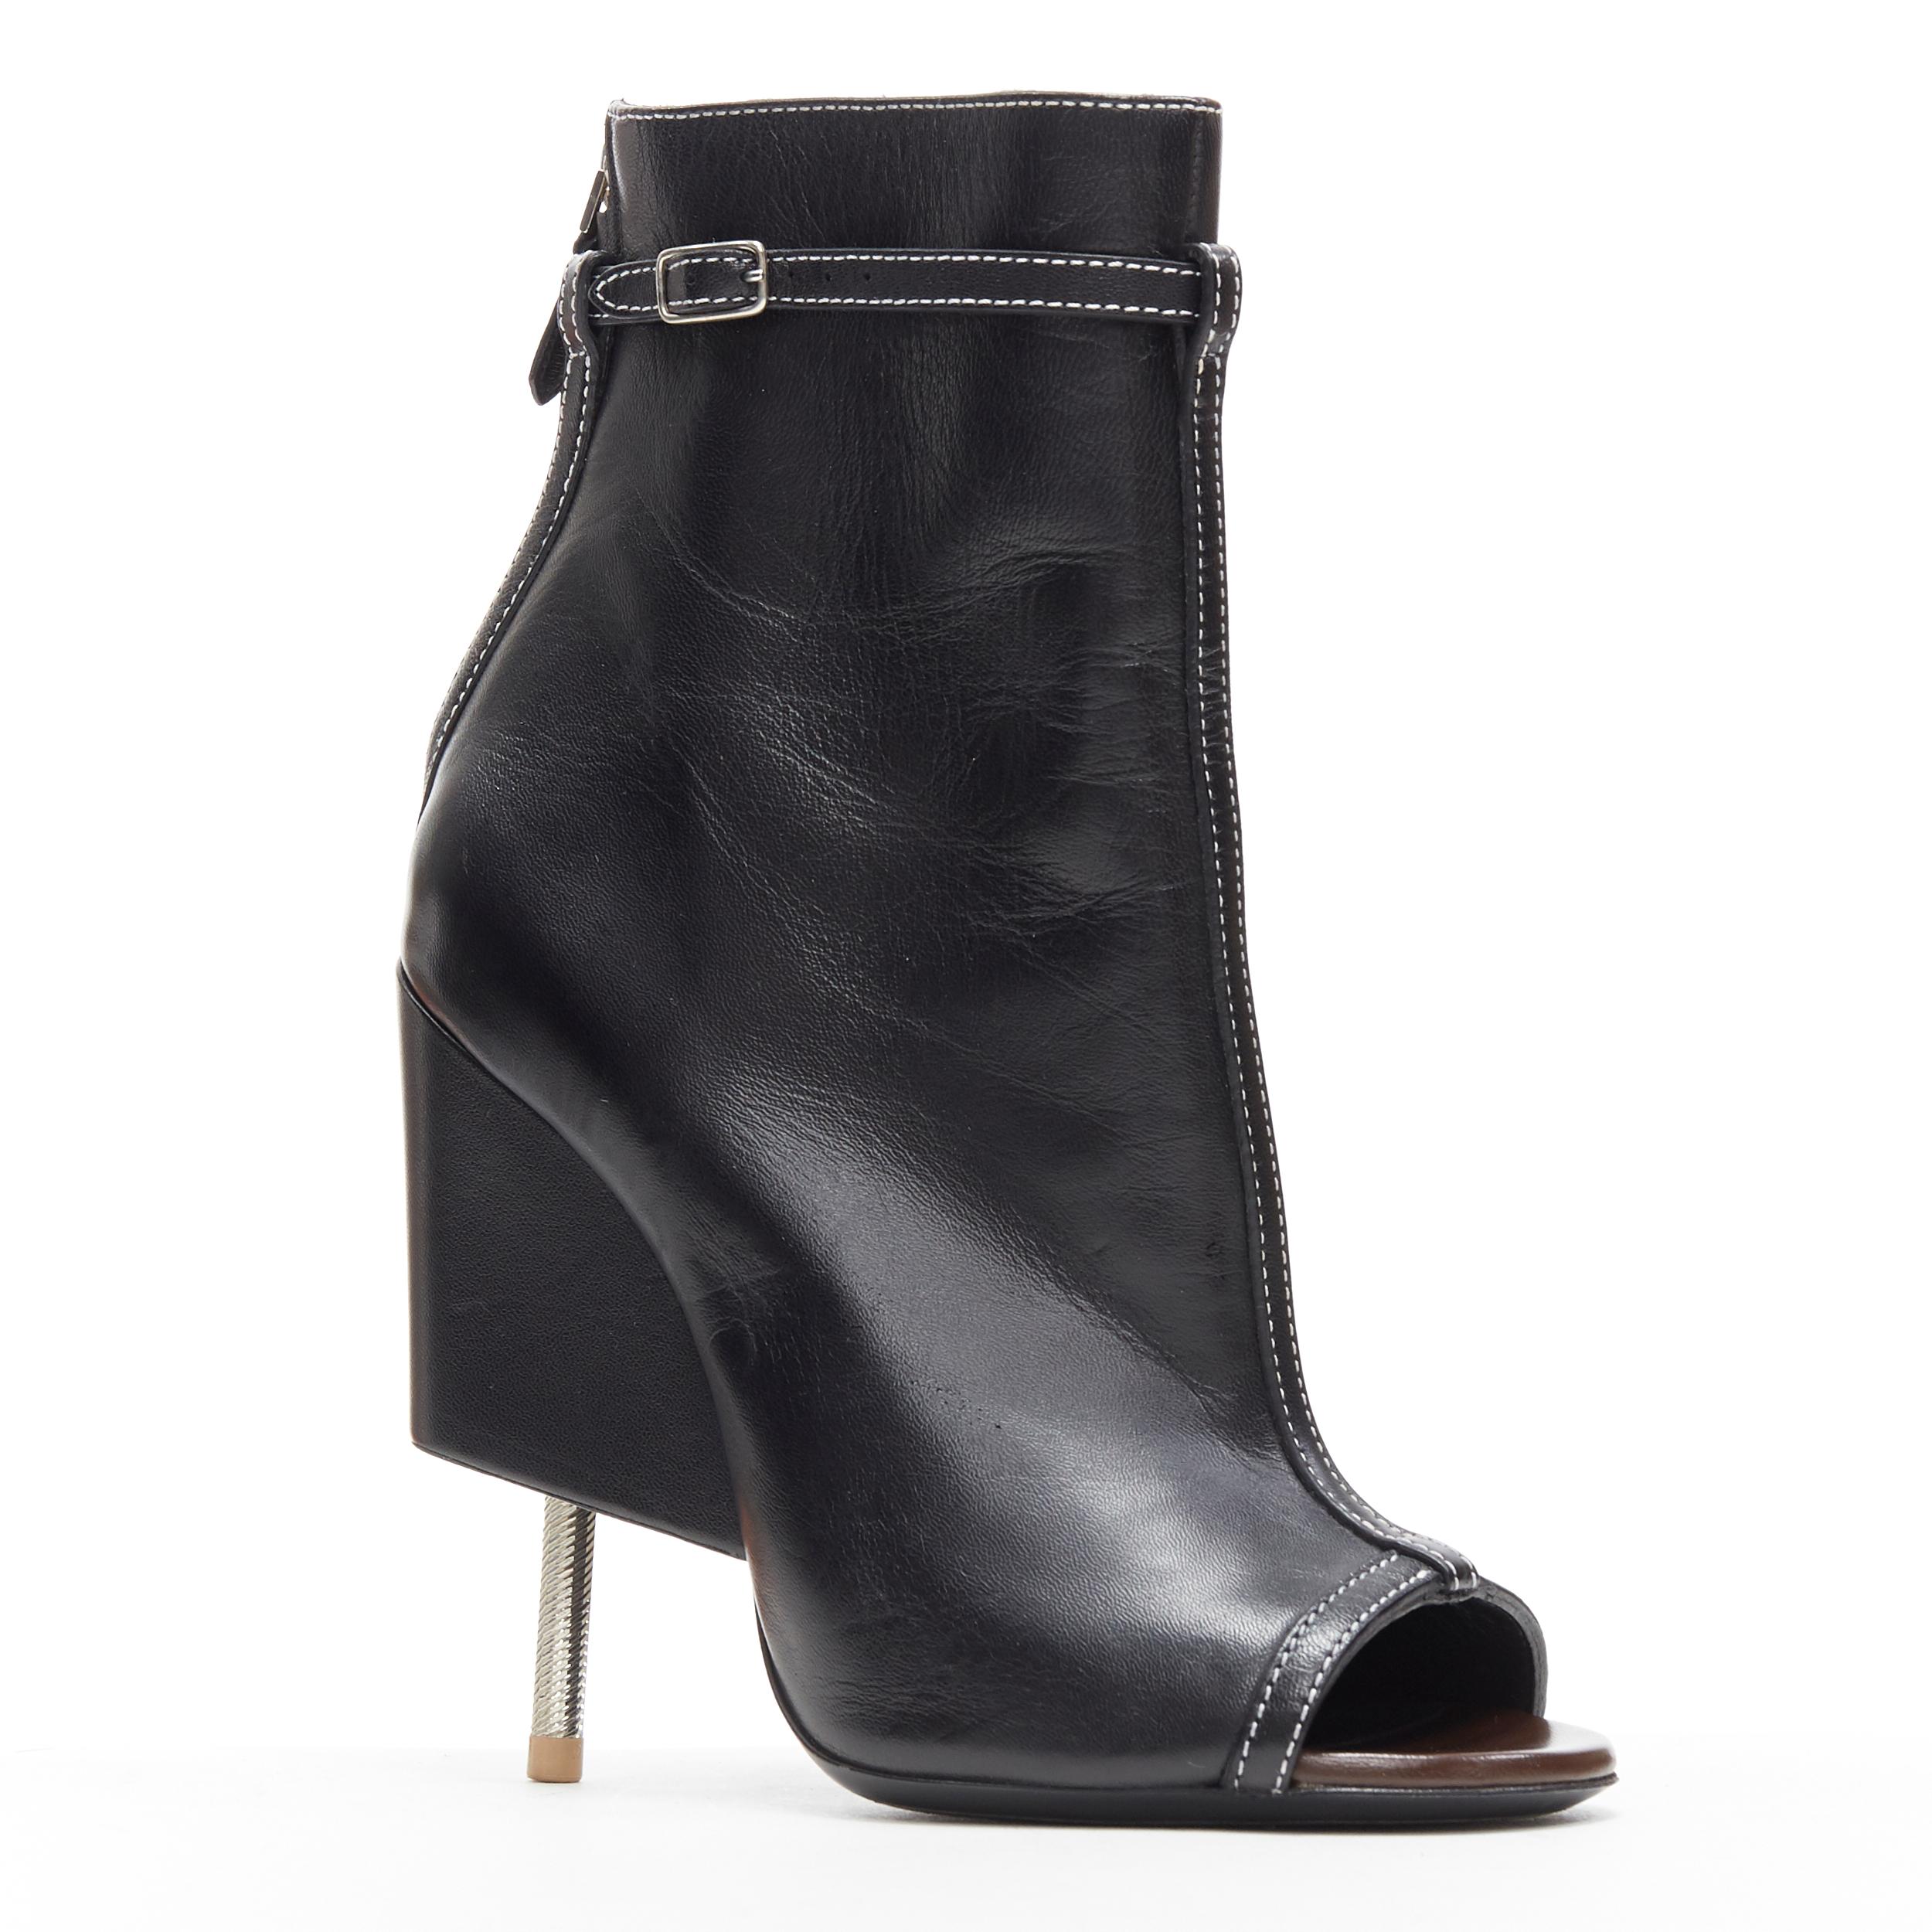 runway GIVENCHY TISCI black leather overstitched peep toe nail heel bootie EU38
Brand: Givenchy
Designer: Riccardo Tisci
Model Name / Style: Bootie
Material: Leather
Color: Black
Pattern: Solid
Closure: Zip
Extra Detail: Ultra High (4 in & Higher)